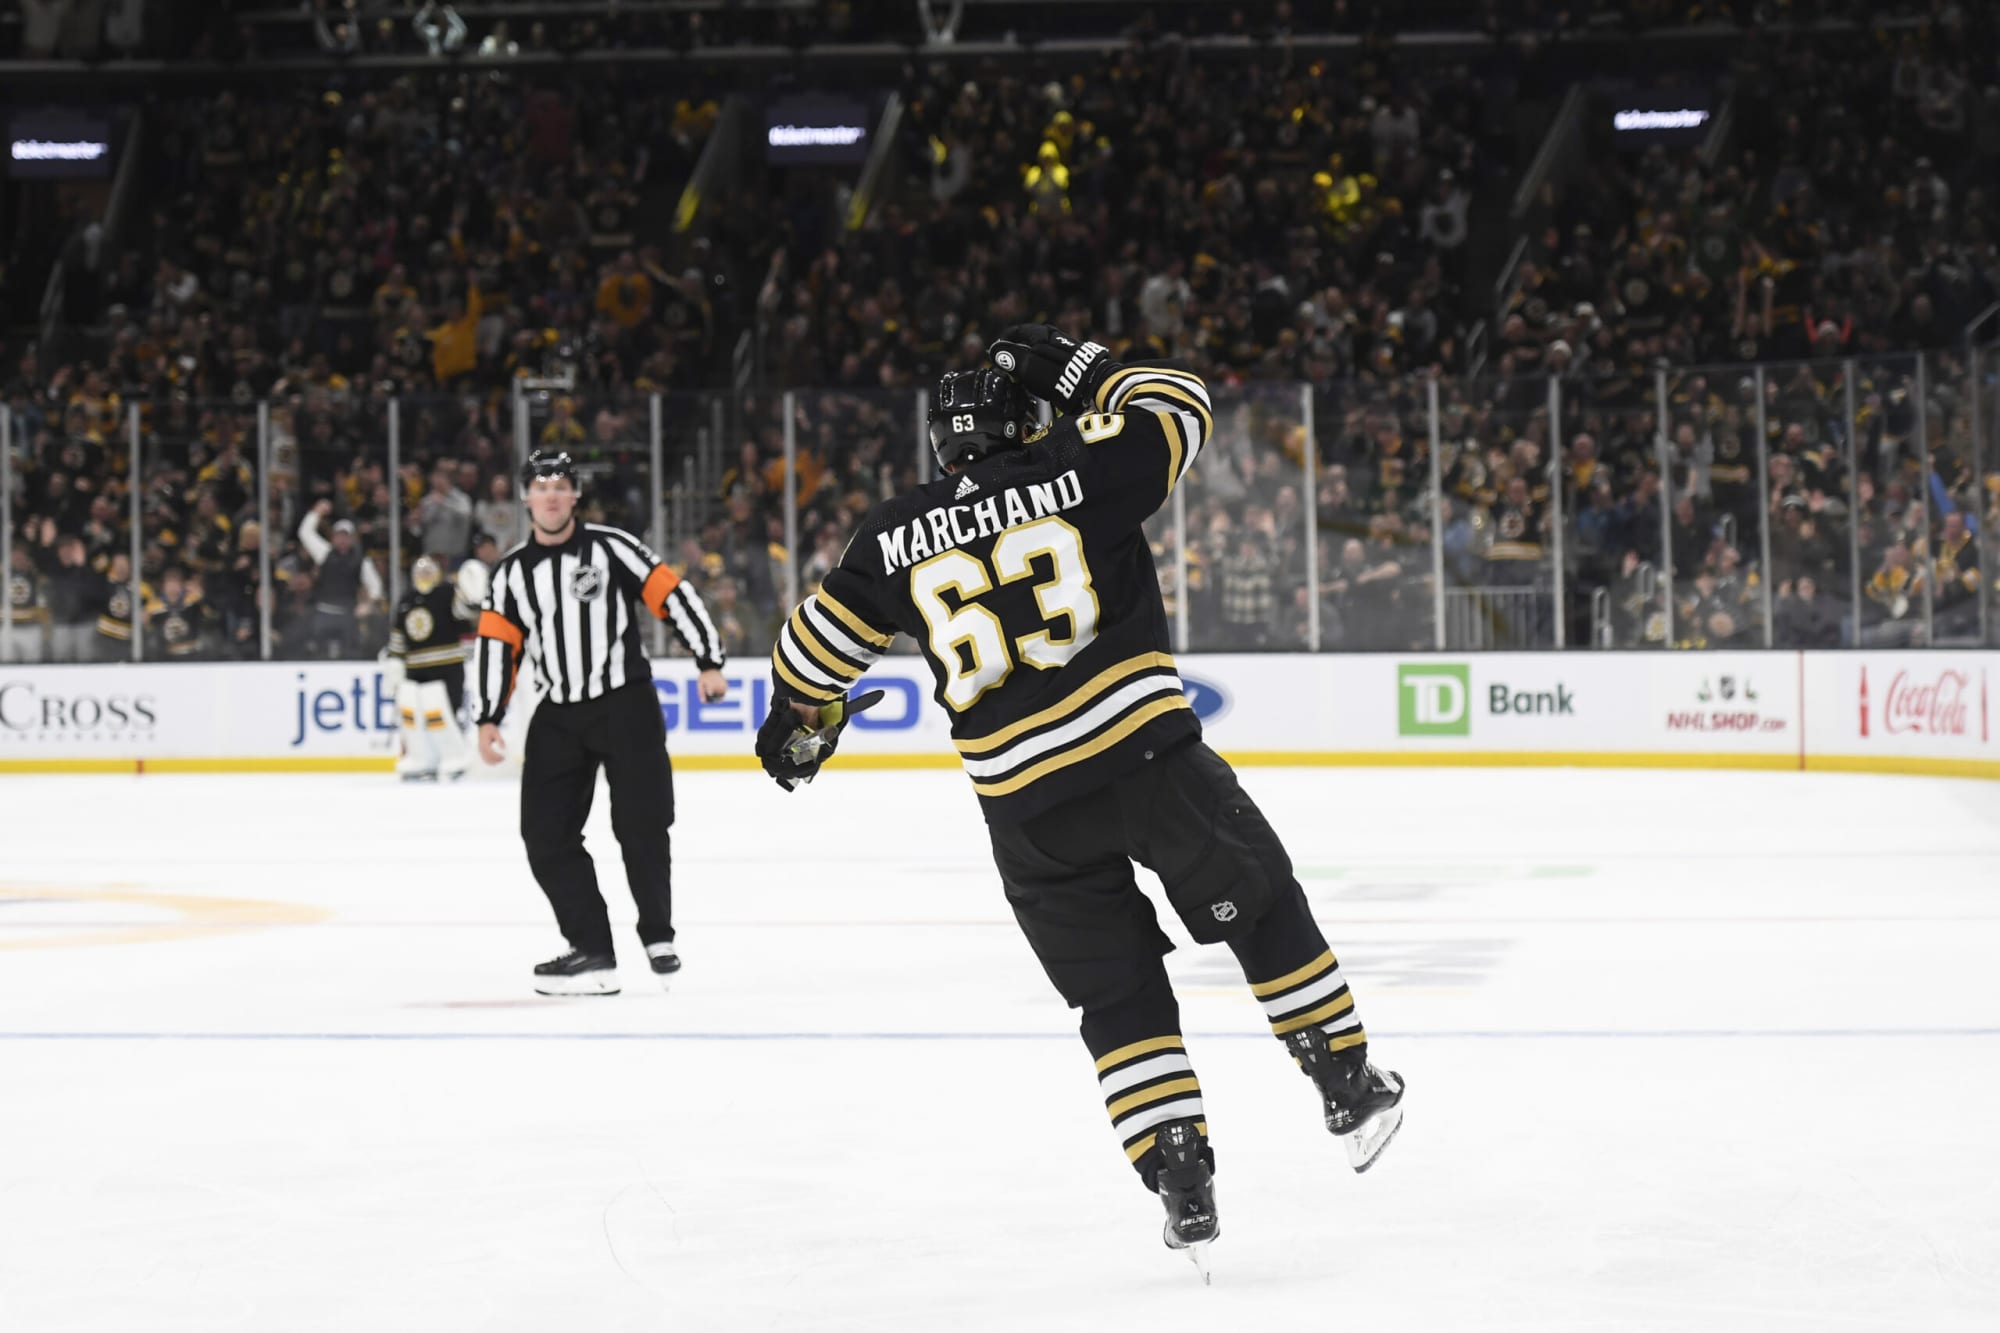 Brad Marchand's Emotional Hat-Trick and Overtime Winner - BVM Sports